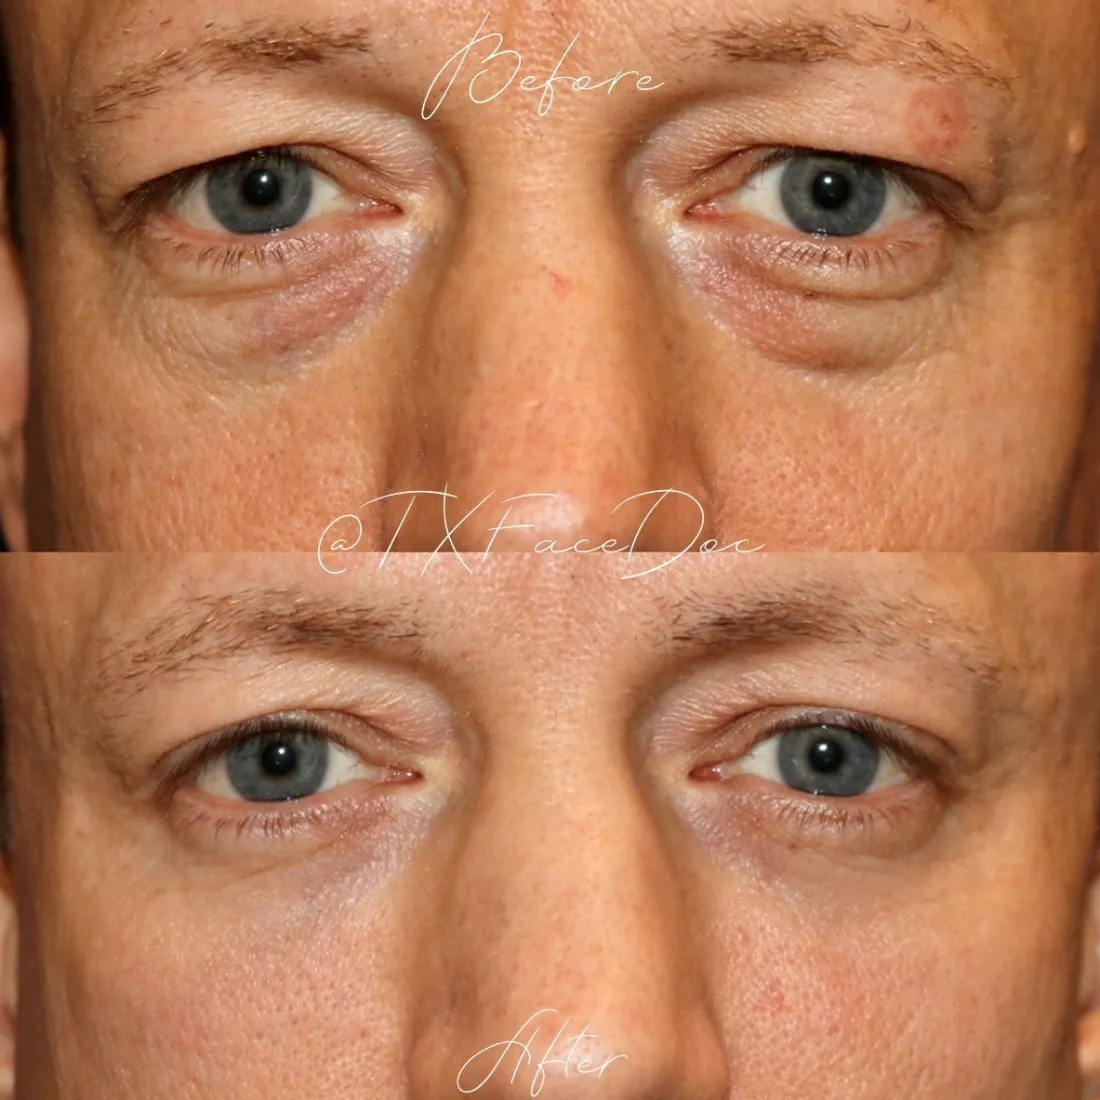 Blepharoplasty before and after performed by Matthew A. Richardson, MD